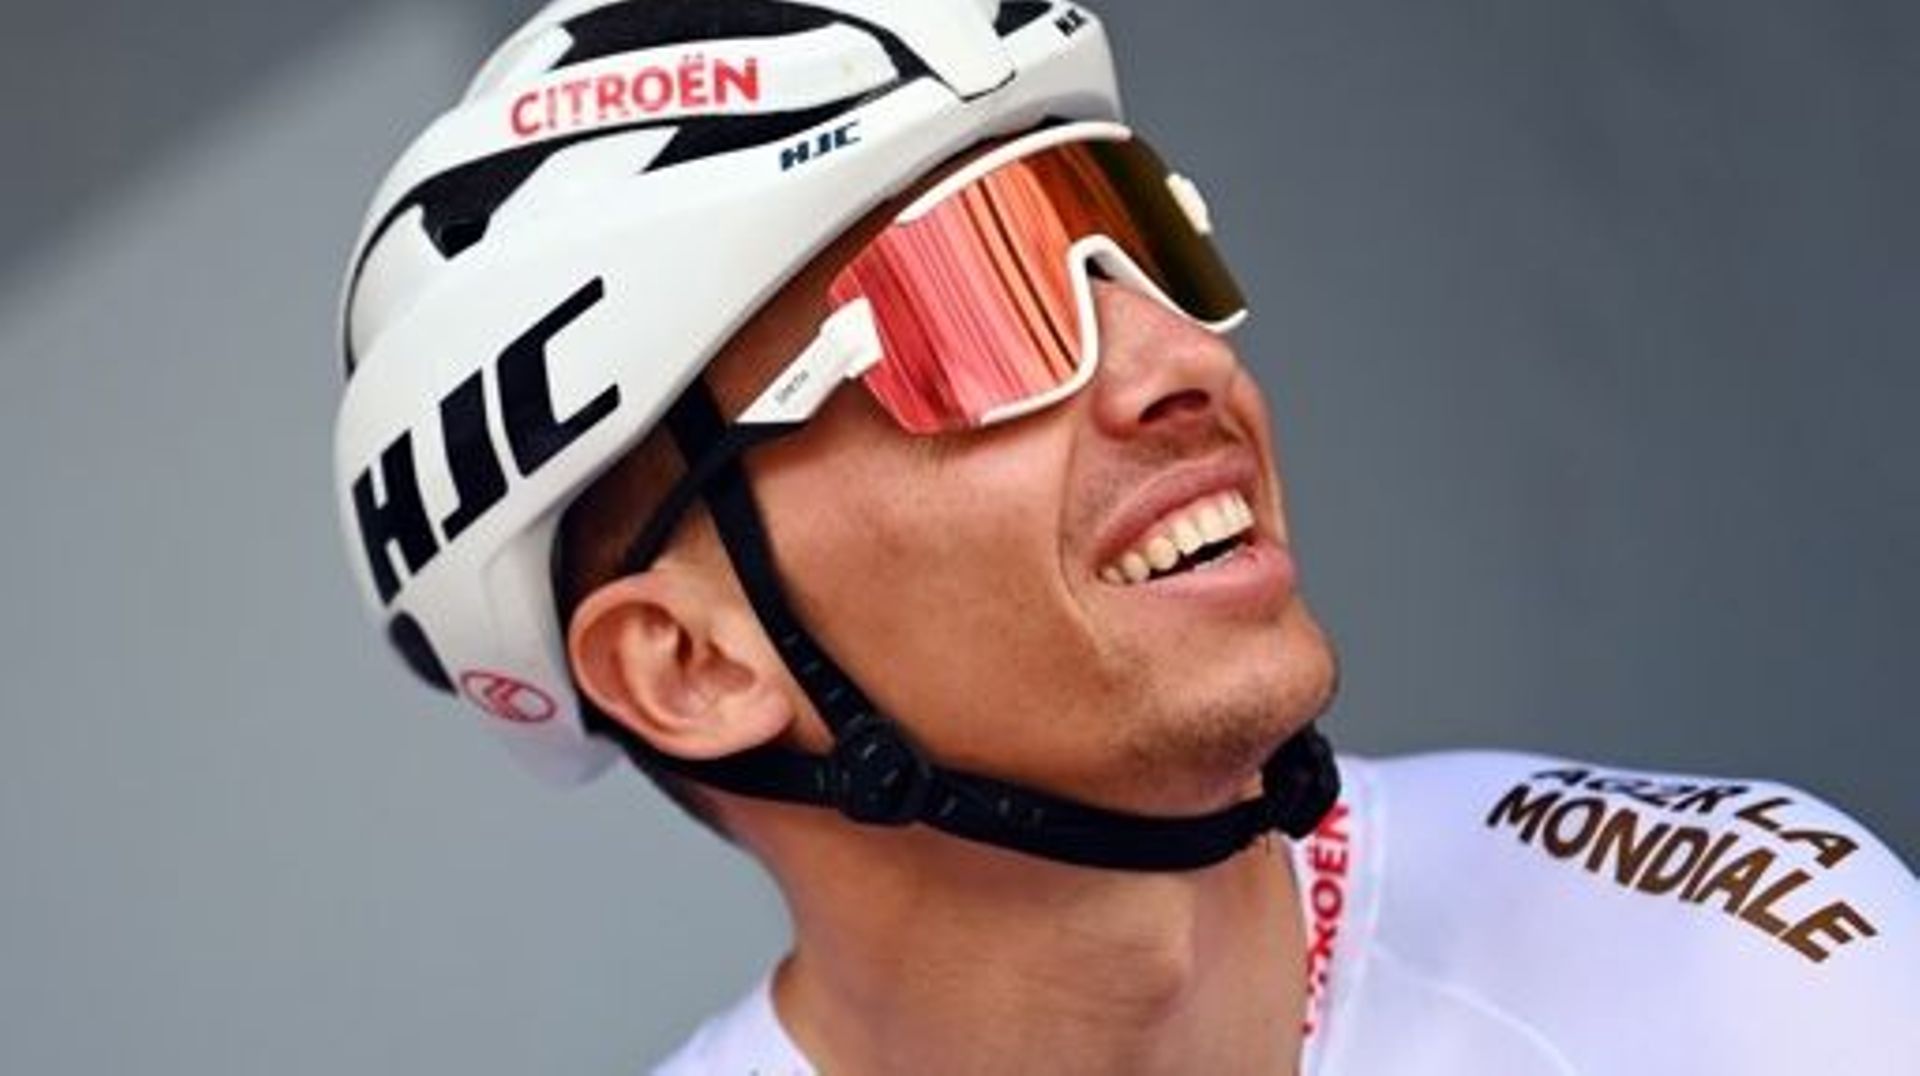 Belgian Oliver Naesen of AG2R Citroen pictured at the start of stage six of the Tour de France cycling race, a 220 km race from Binche, Belgium, to Longwy, France, on Thursday 07 July 2022. This year’s Tour de France takes place from 01 to 24 July 2022. B